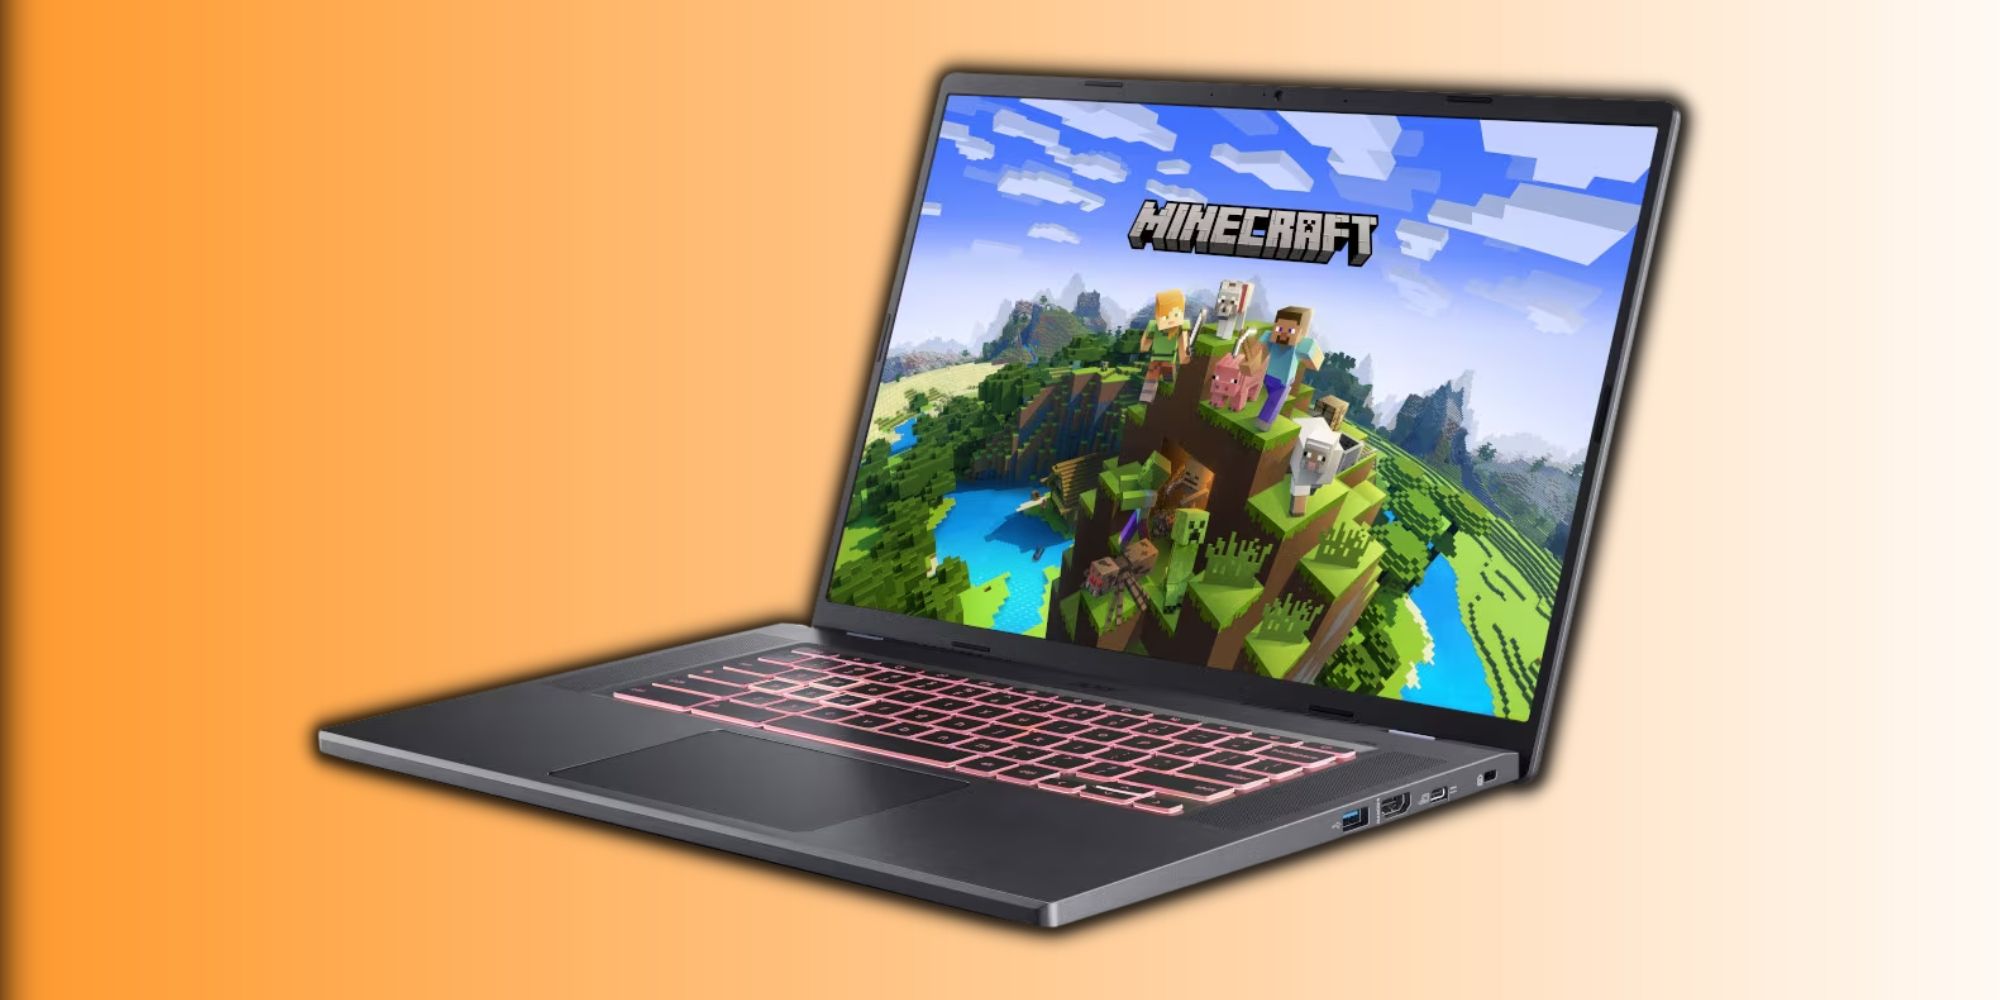 How to install Minecraft on Chromebook